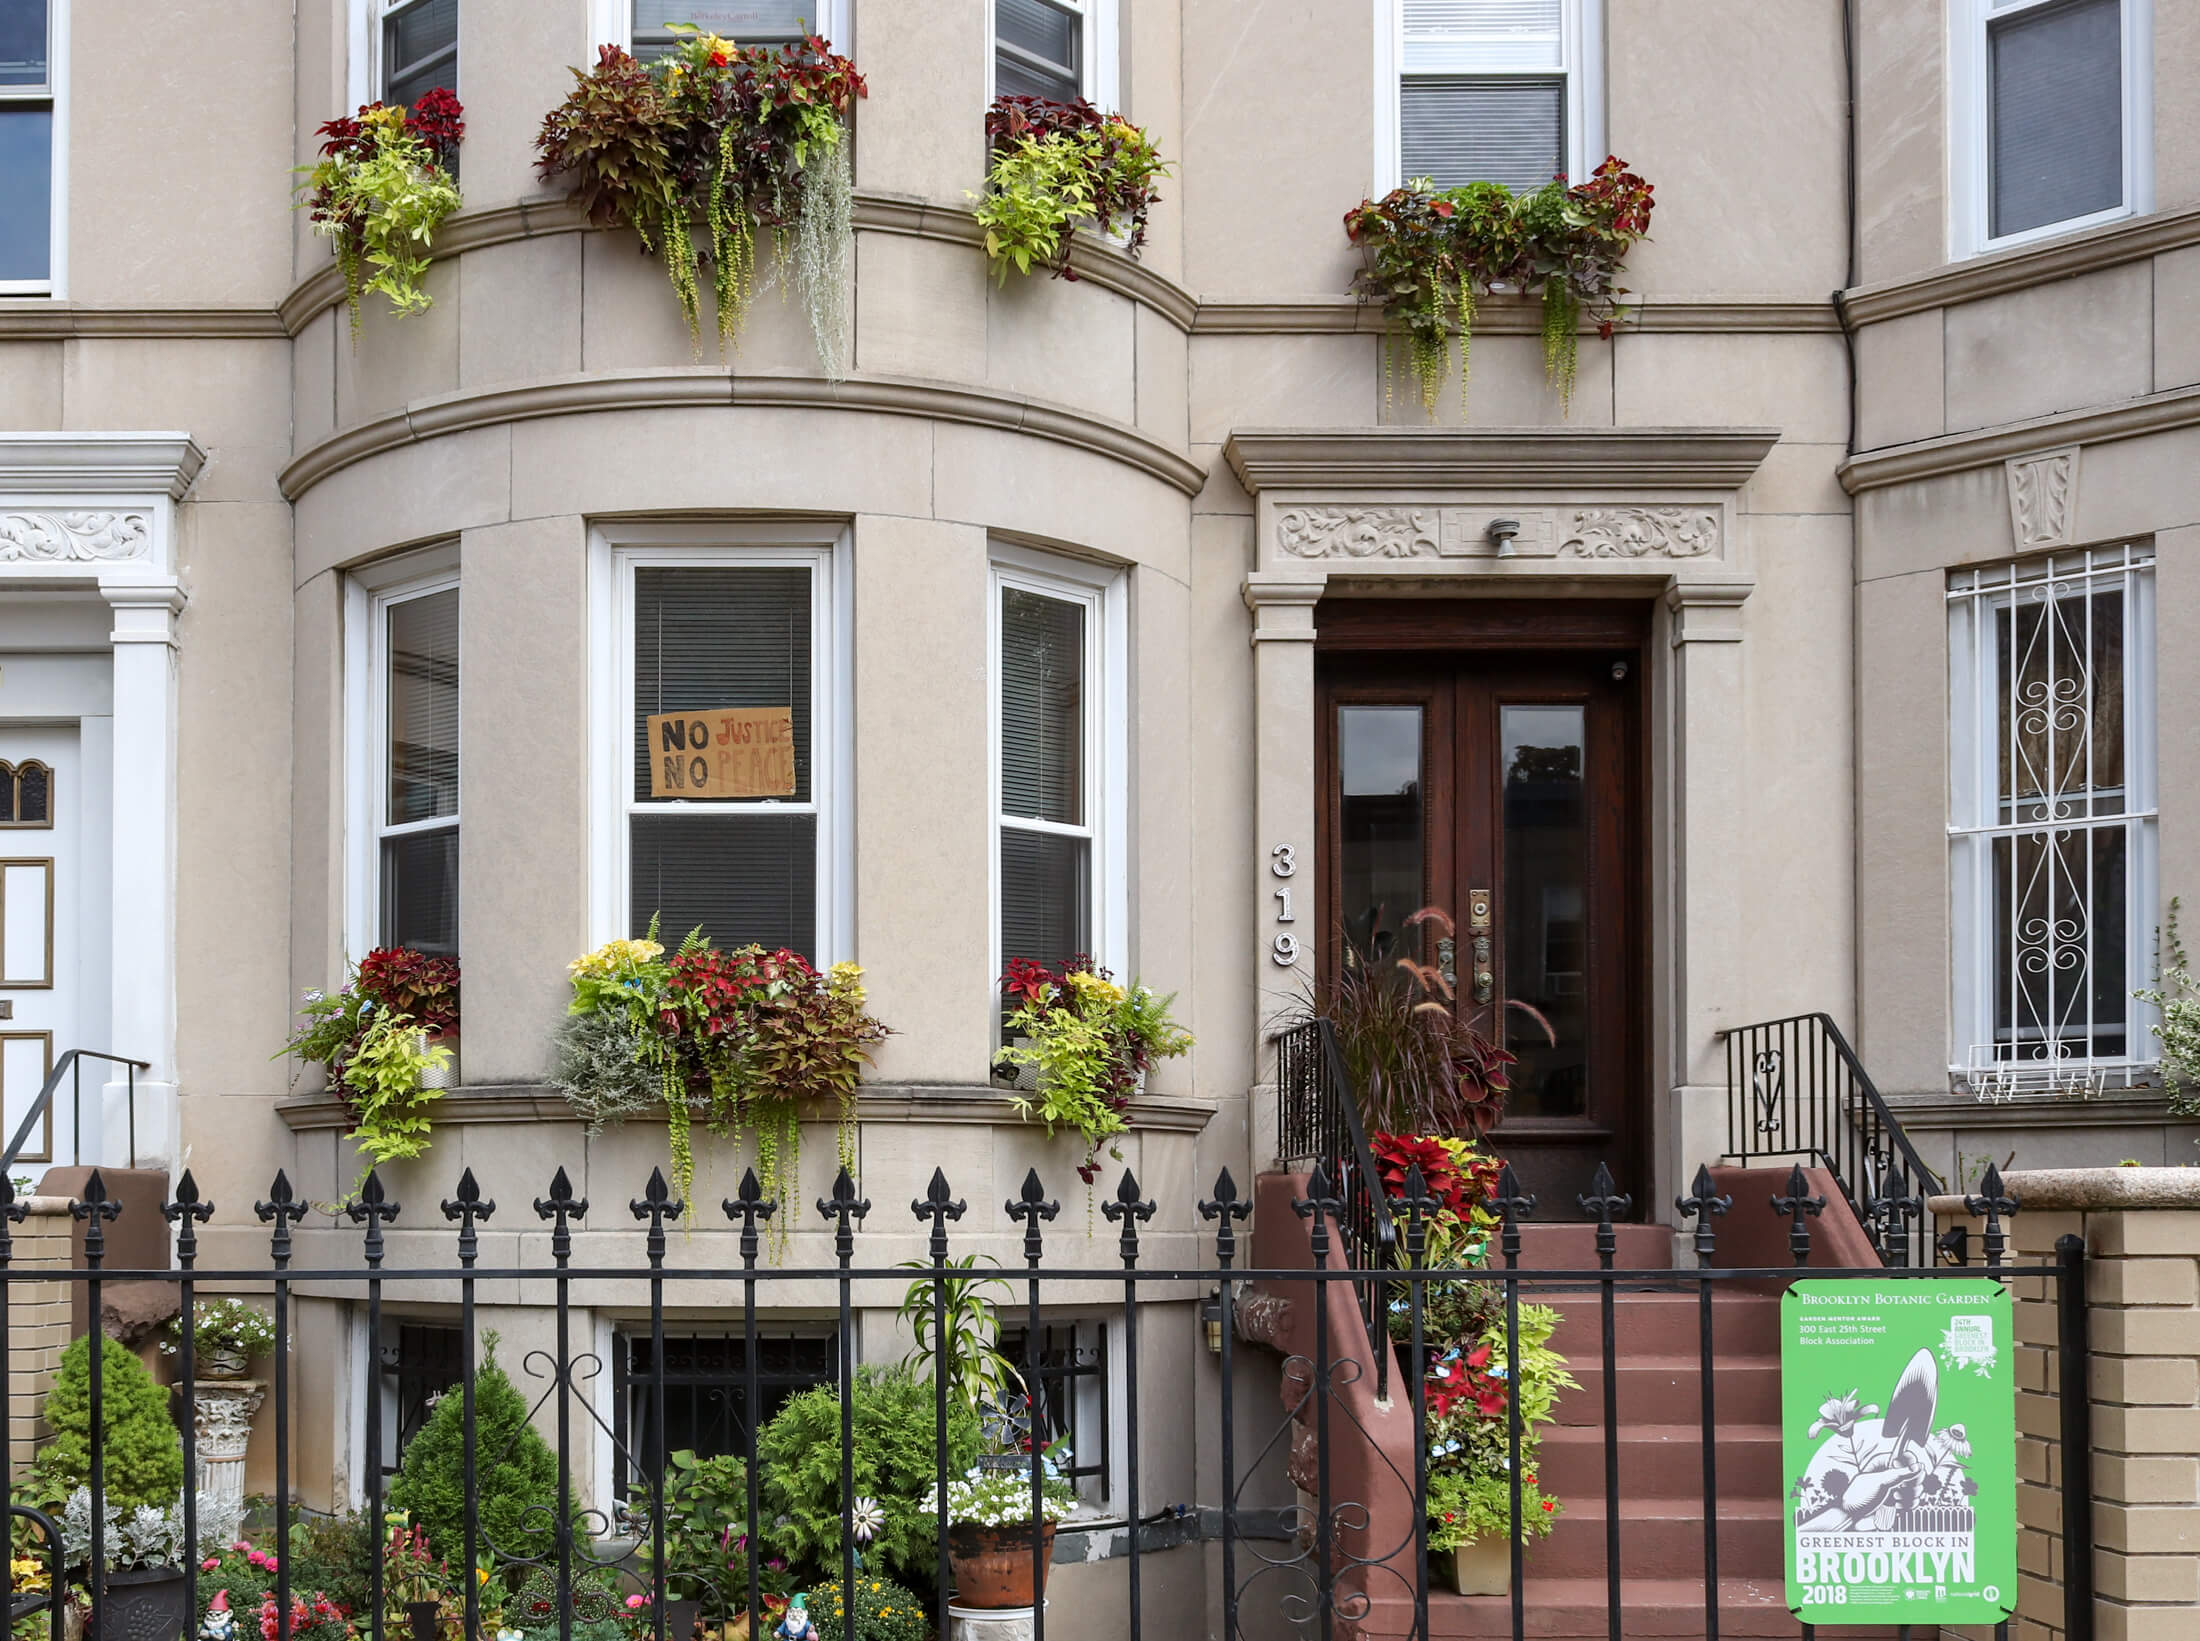 Get Your Window Boxes Ready and Enter the Greenest Block in ...